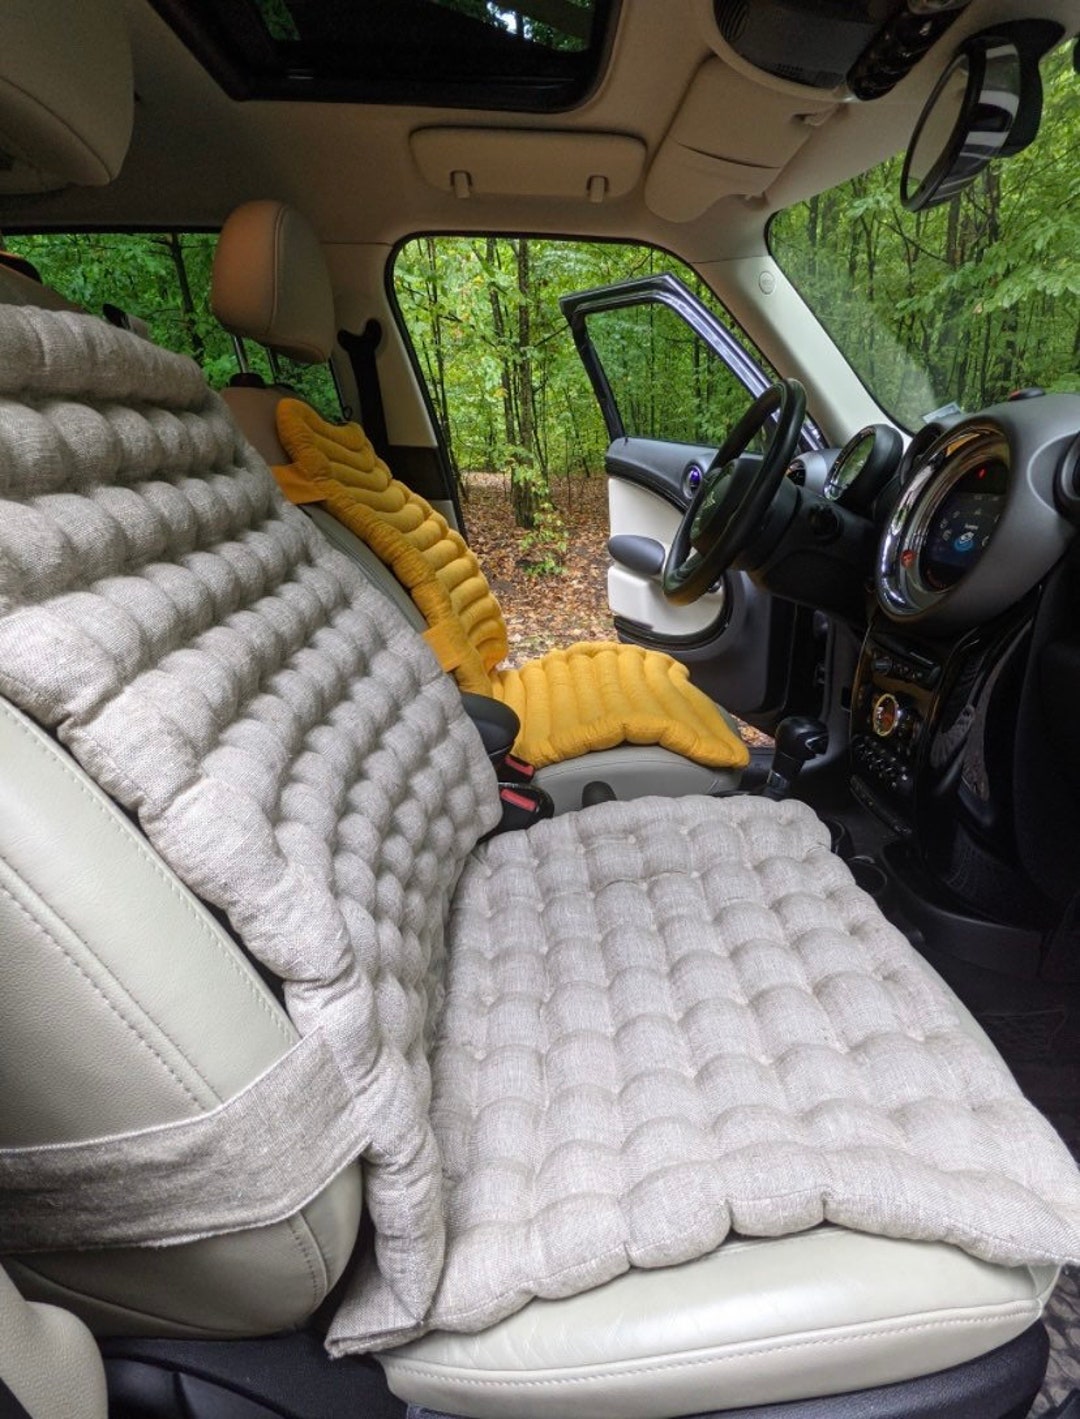 The Best Seat Cushions For Truck Drivers - LA Truck Driving School